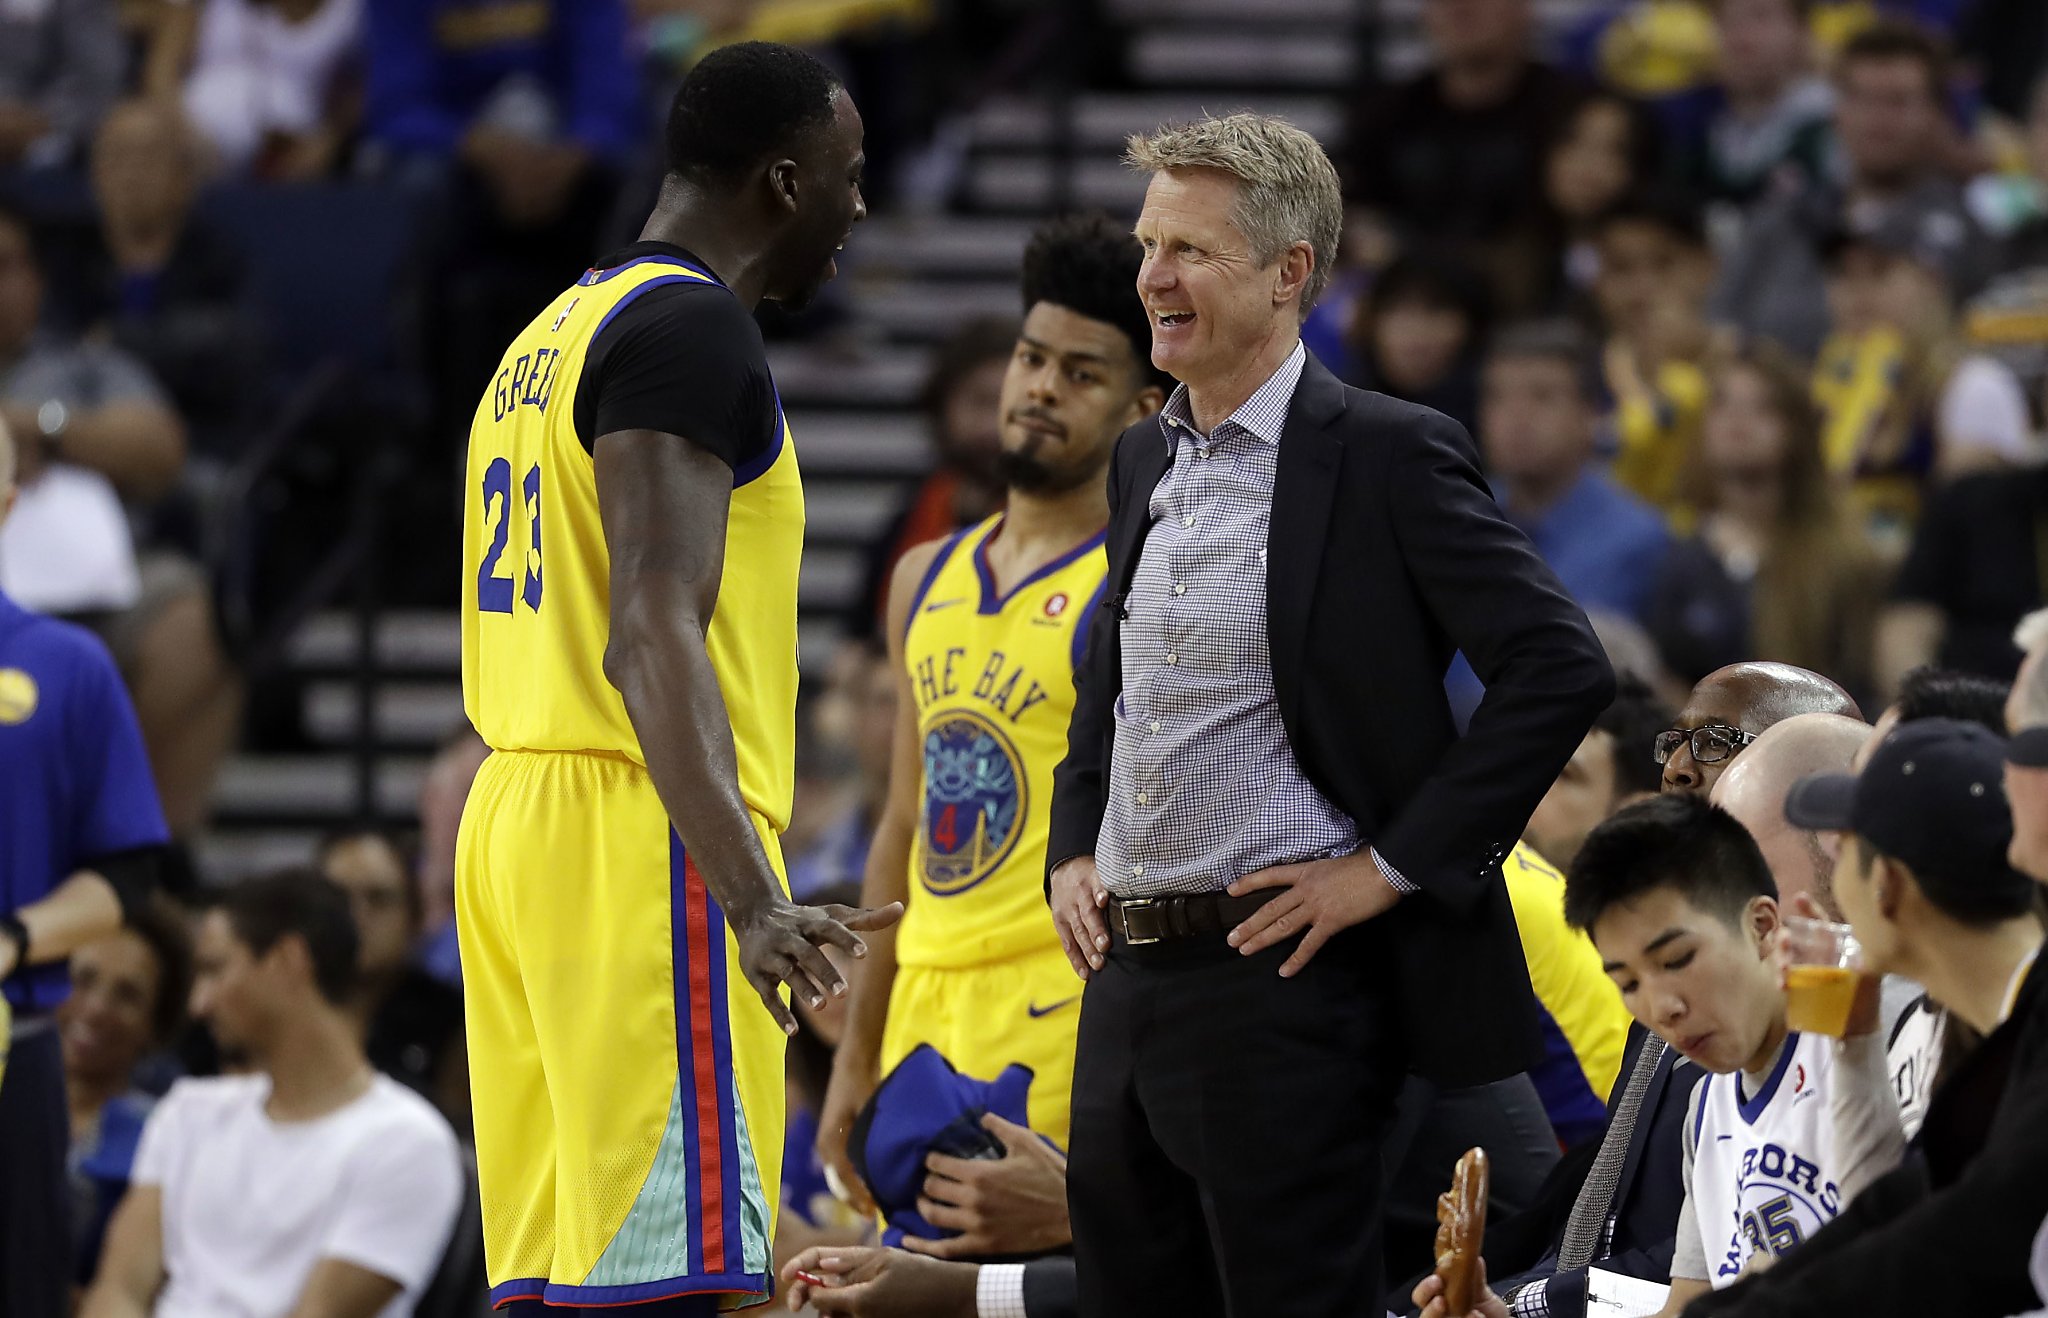 Steve Kerr defends Warriors’ decision not to attend protest in Sacramento